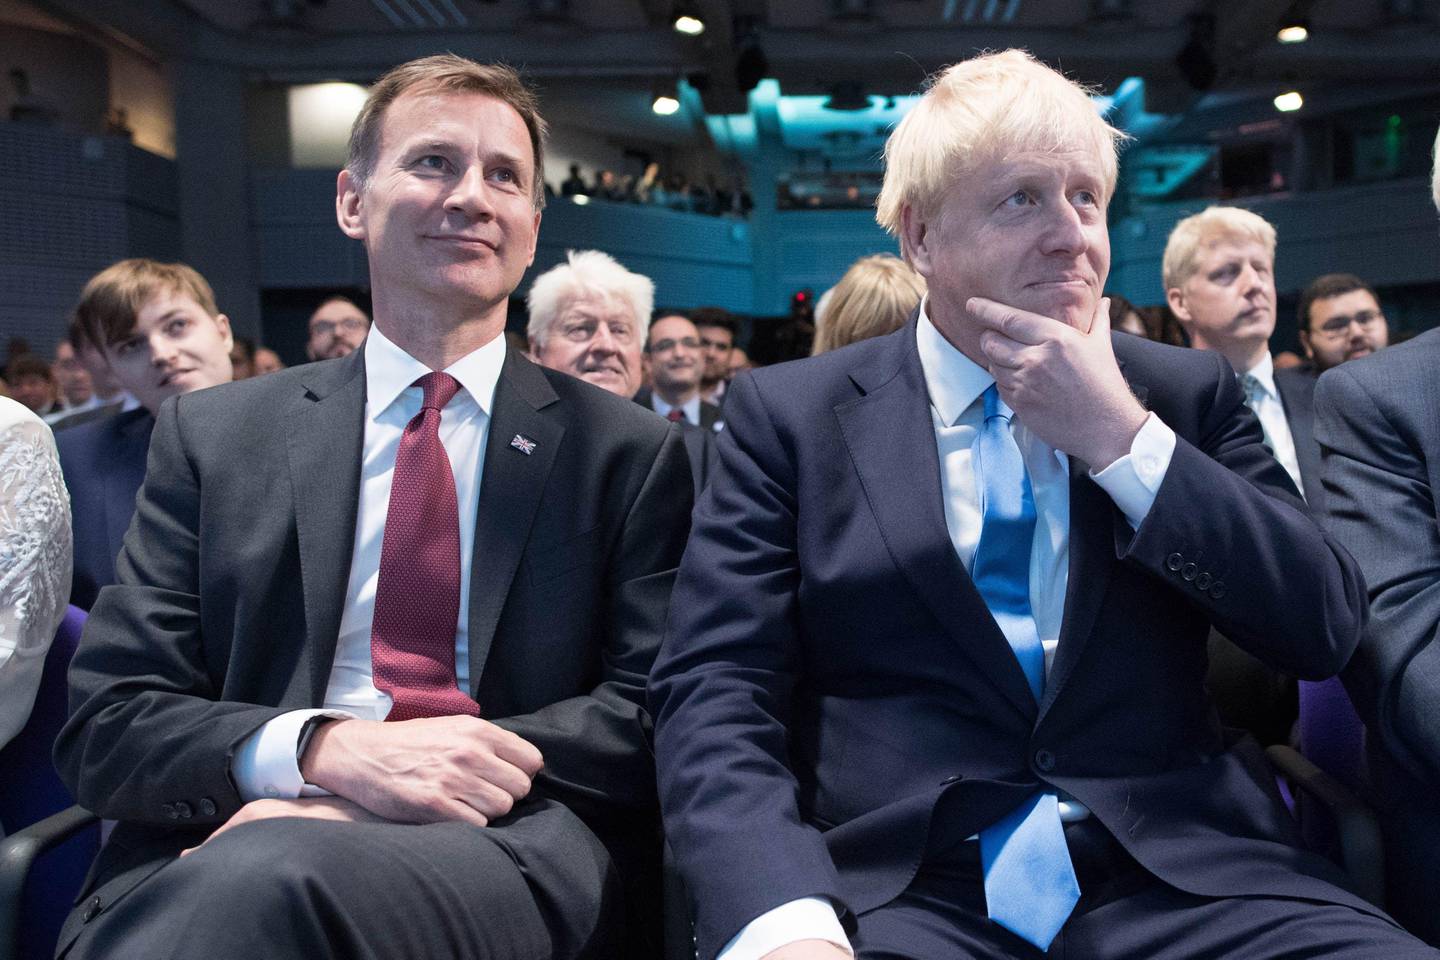 Conservative Party leadership contenders Boris Johnson (R) and Jeremy Hunt (L) sit together at an event to announce the winner of the party's leadership contest in central London on July 23, 2019. - Boris Johnson won the race to become Britain's next prime minister on Tuesday, heading straight into a confrontation over Brexit with Brussels and parliament, as well as a tense diplomatic standoff with Iran. (Photo by Stefan Rousseau / POOL / AFP)